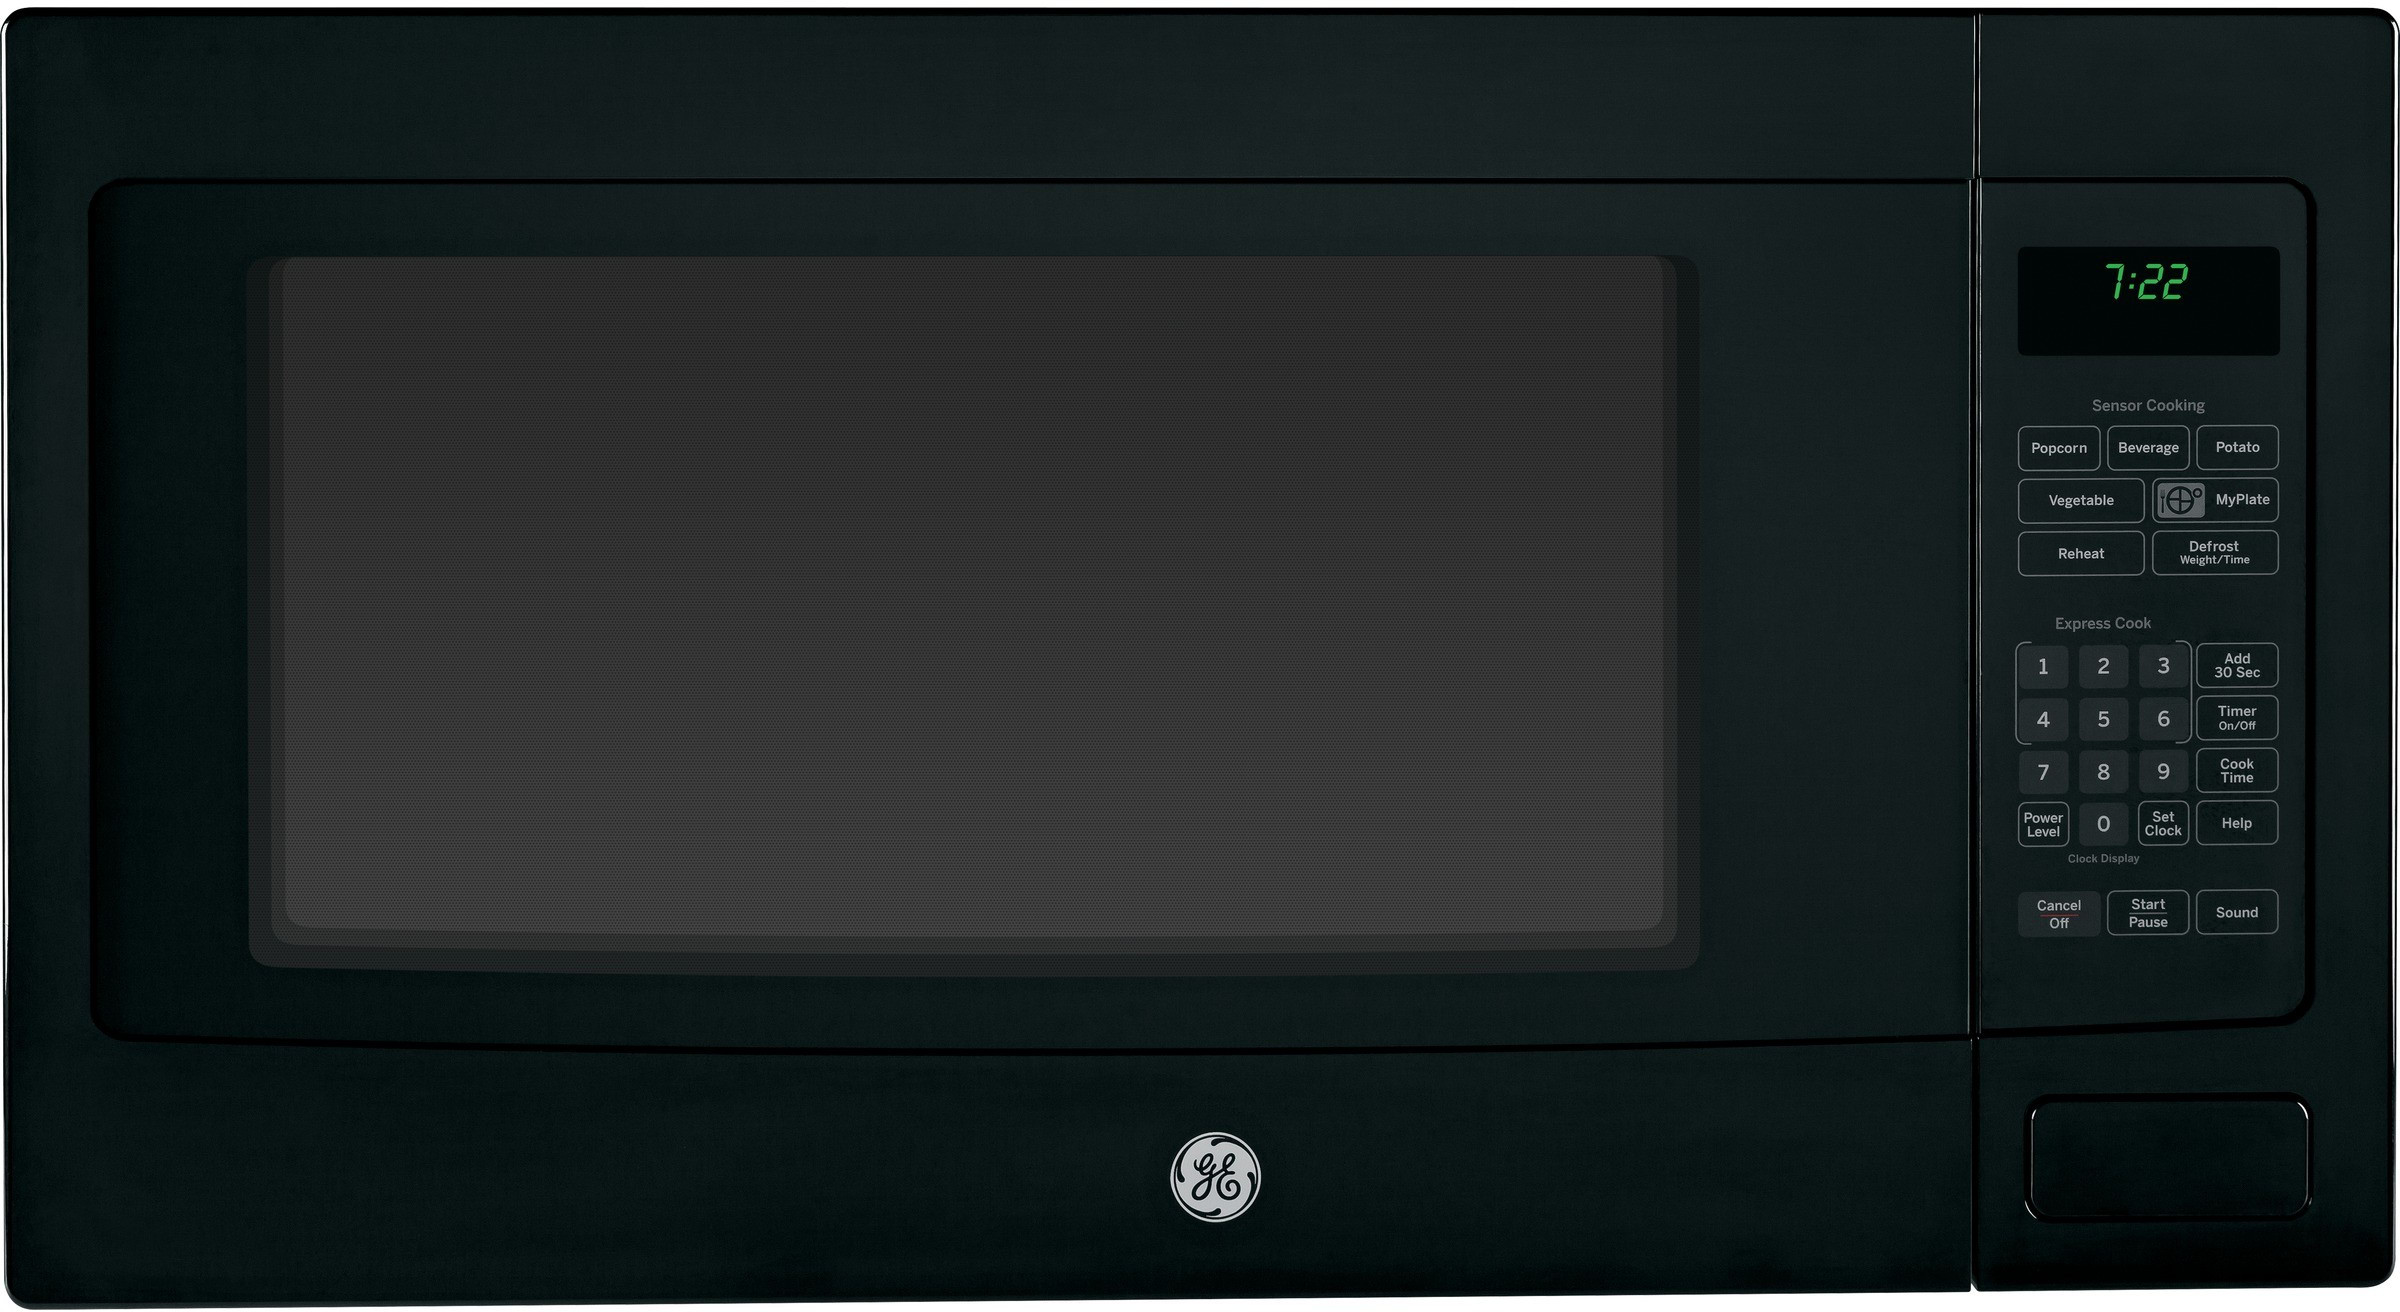 GE PEB7226DFBB 2.2 cu. ft. Countertop or Built-In Microwave Oven with